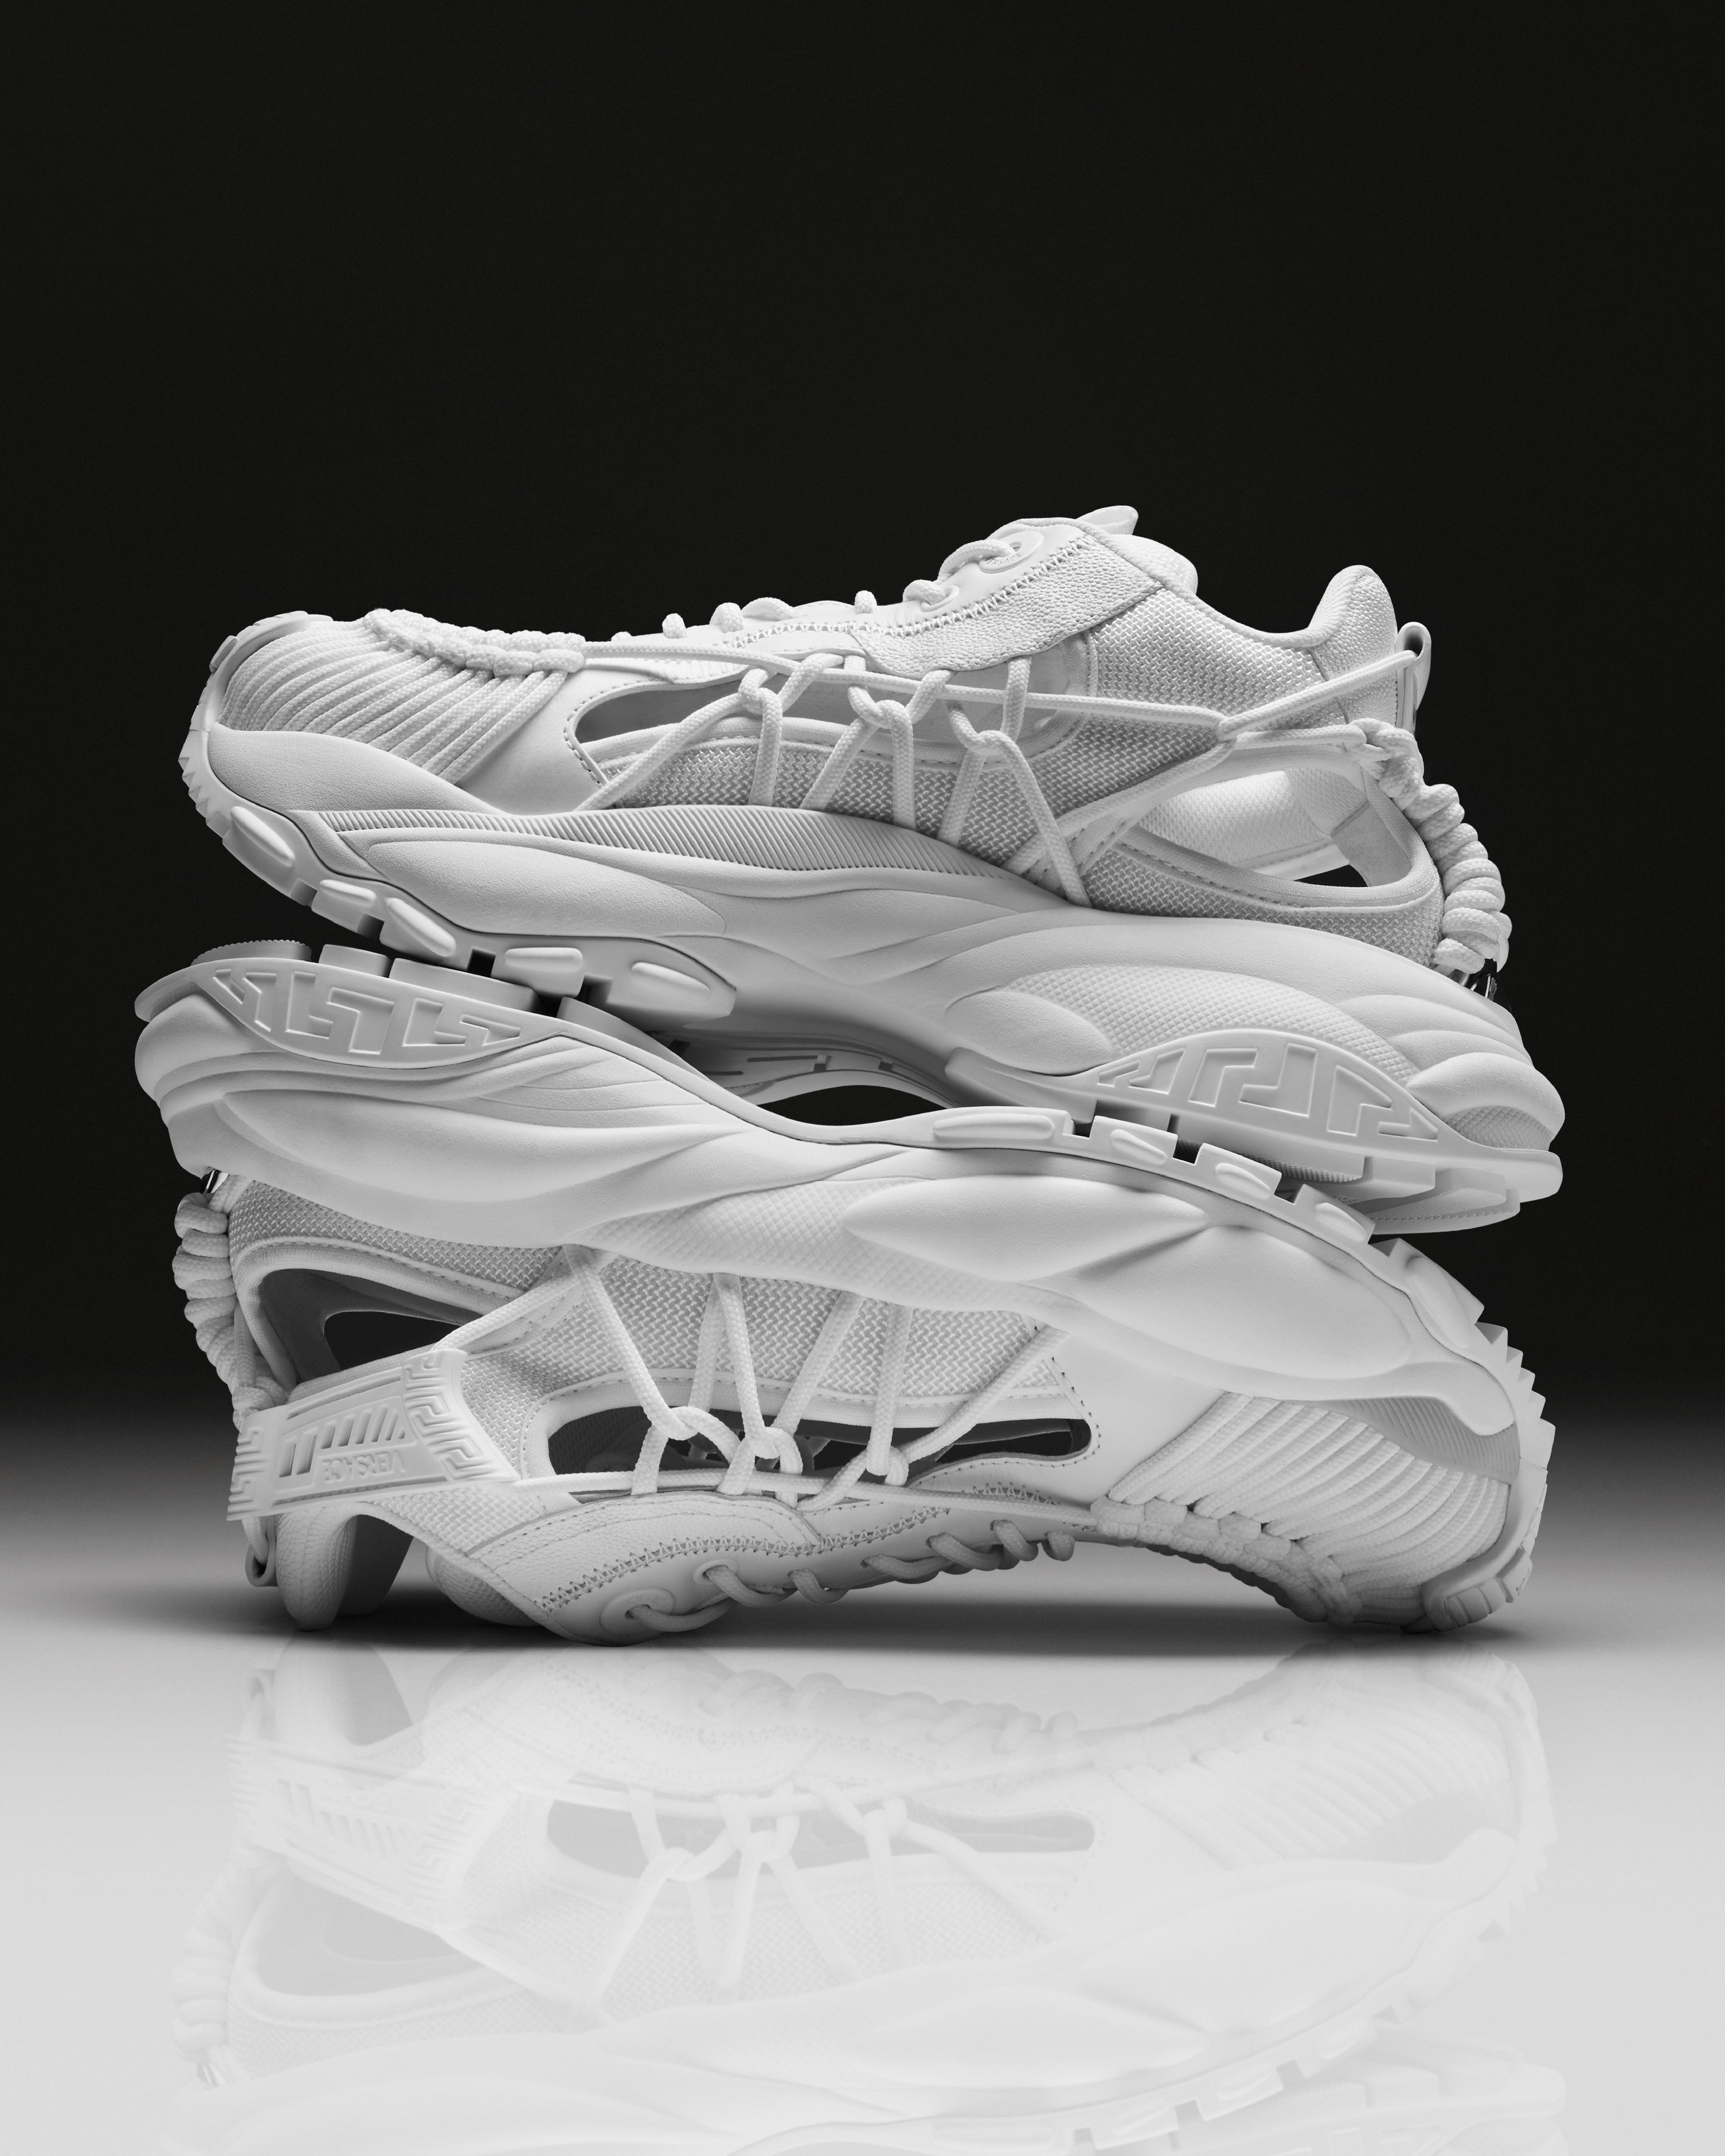 Stack of three white, intricate, modern sneakers with detailed textures and futuristic design elements, displayed against a black background. No people present